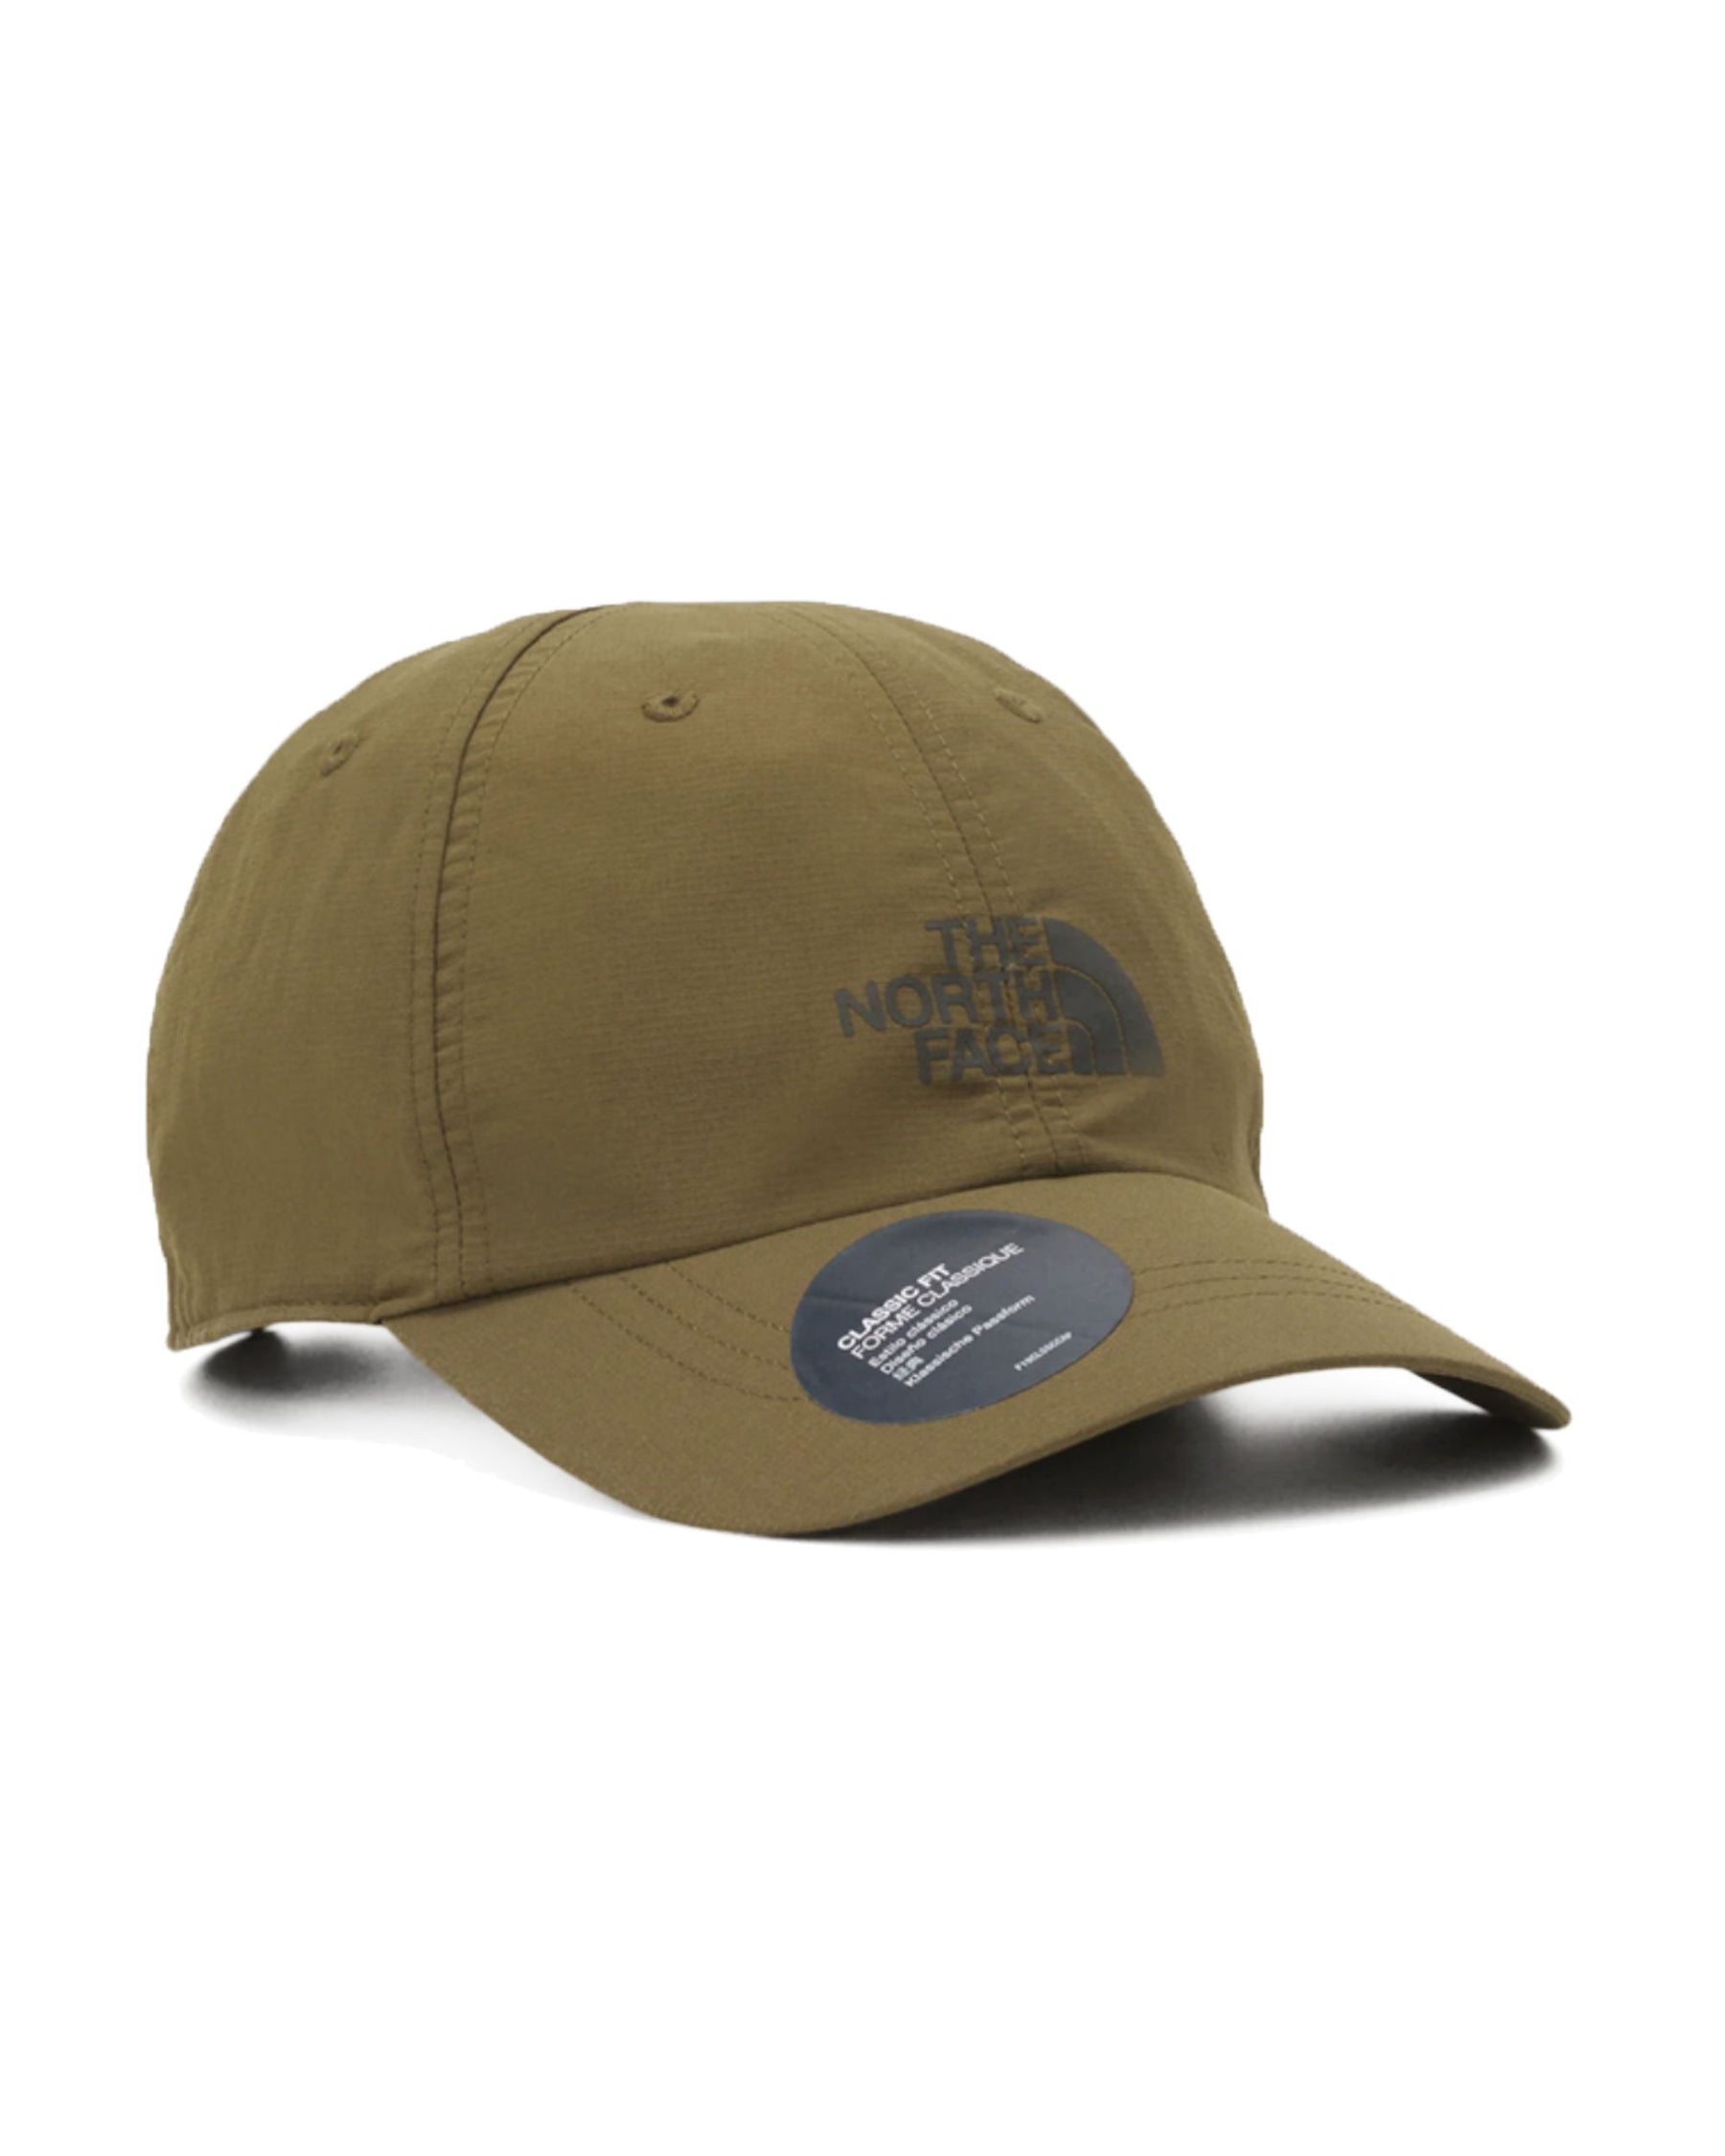 Cappello The North face Recycled 66 Classic Hat Verde Militare